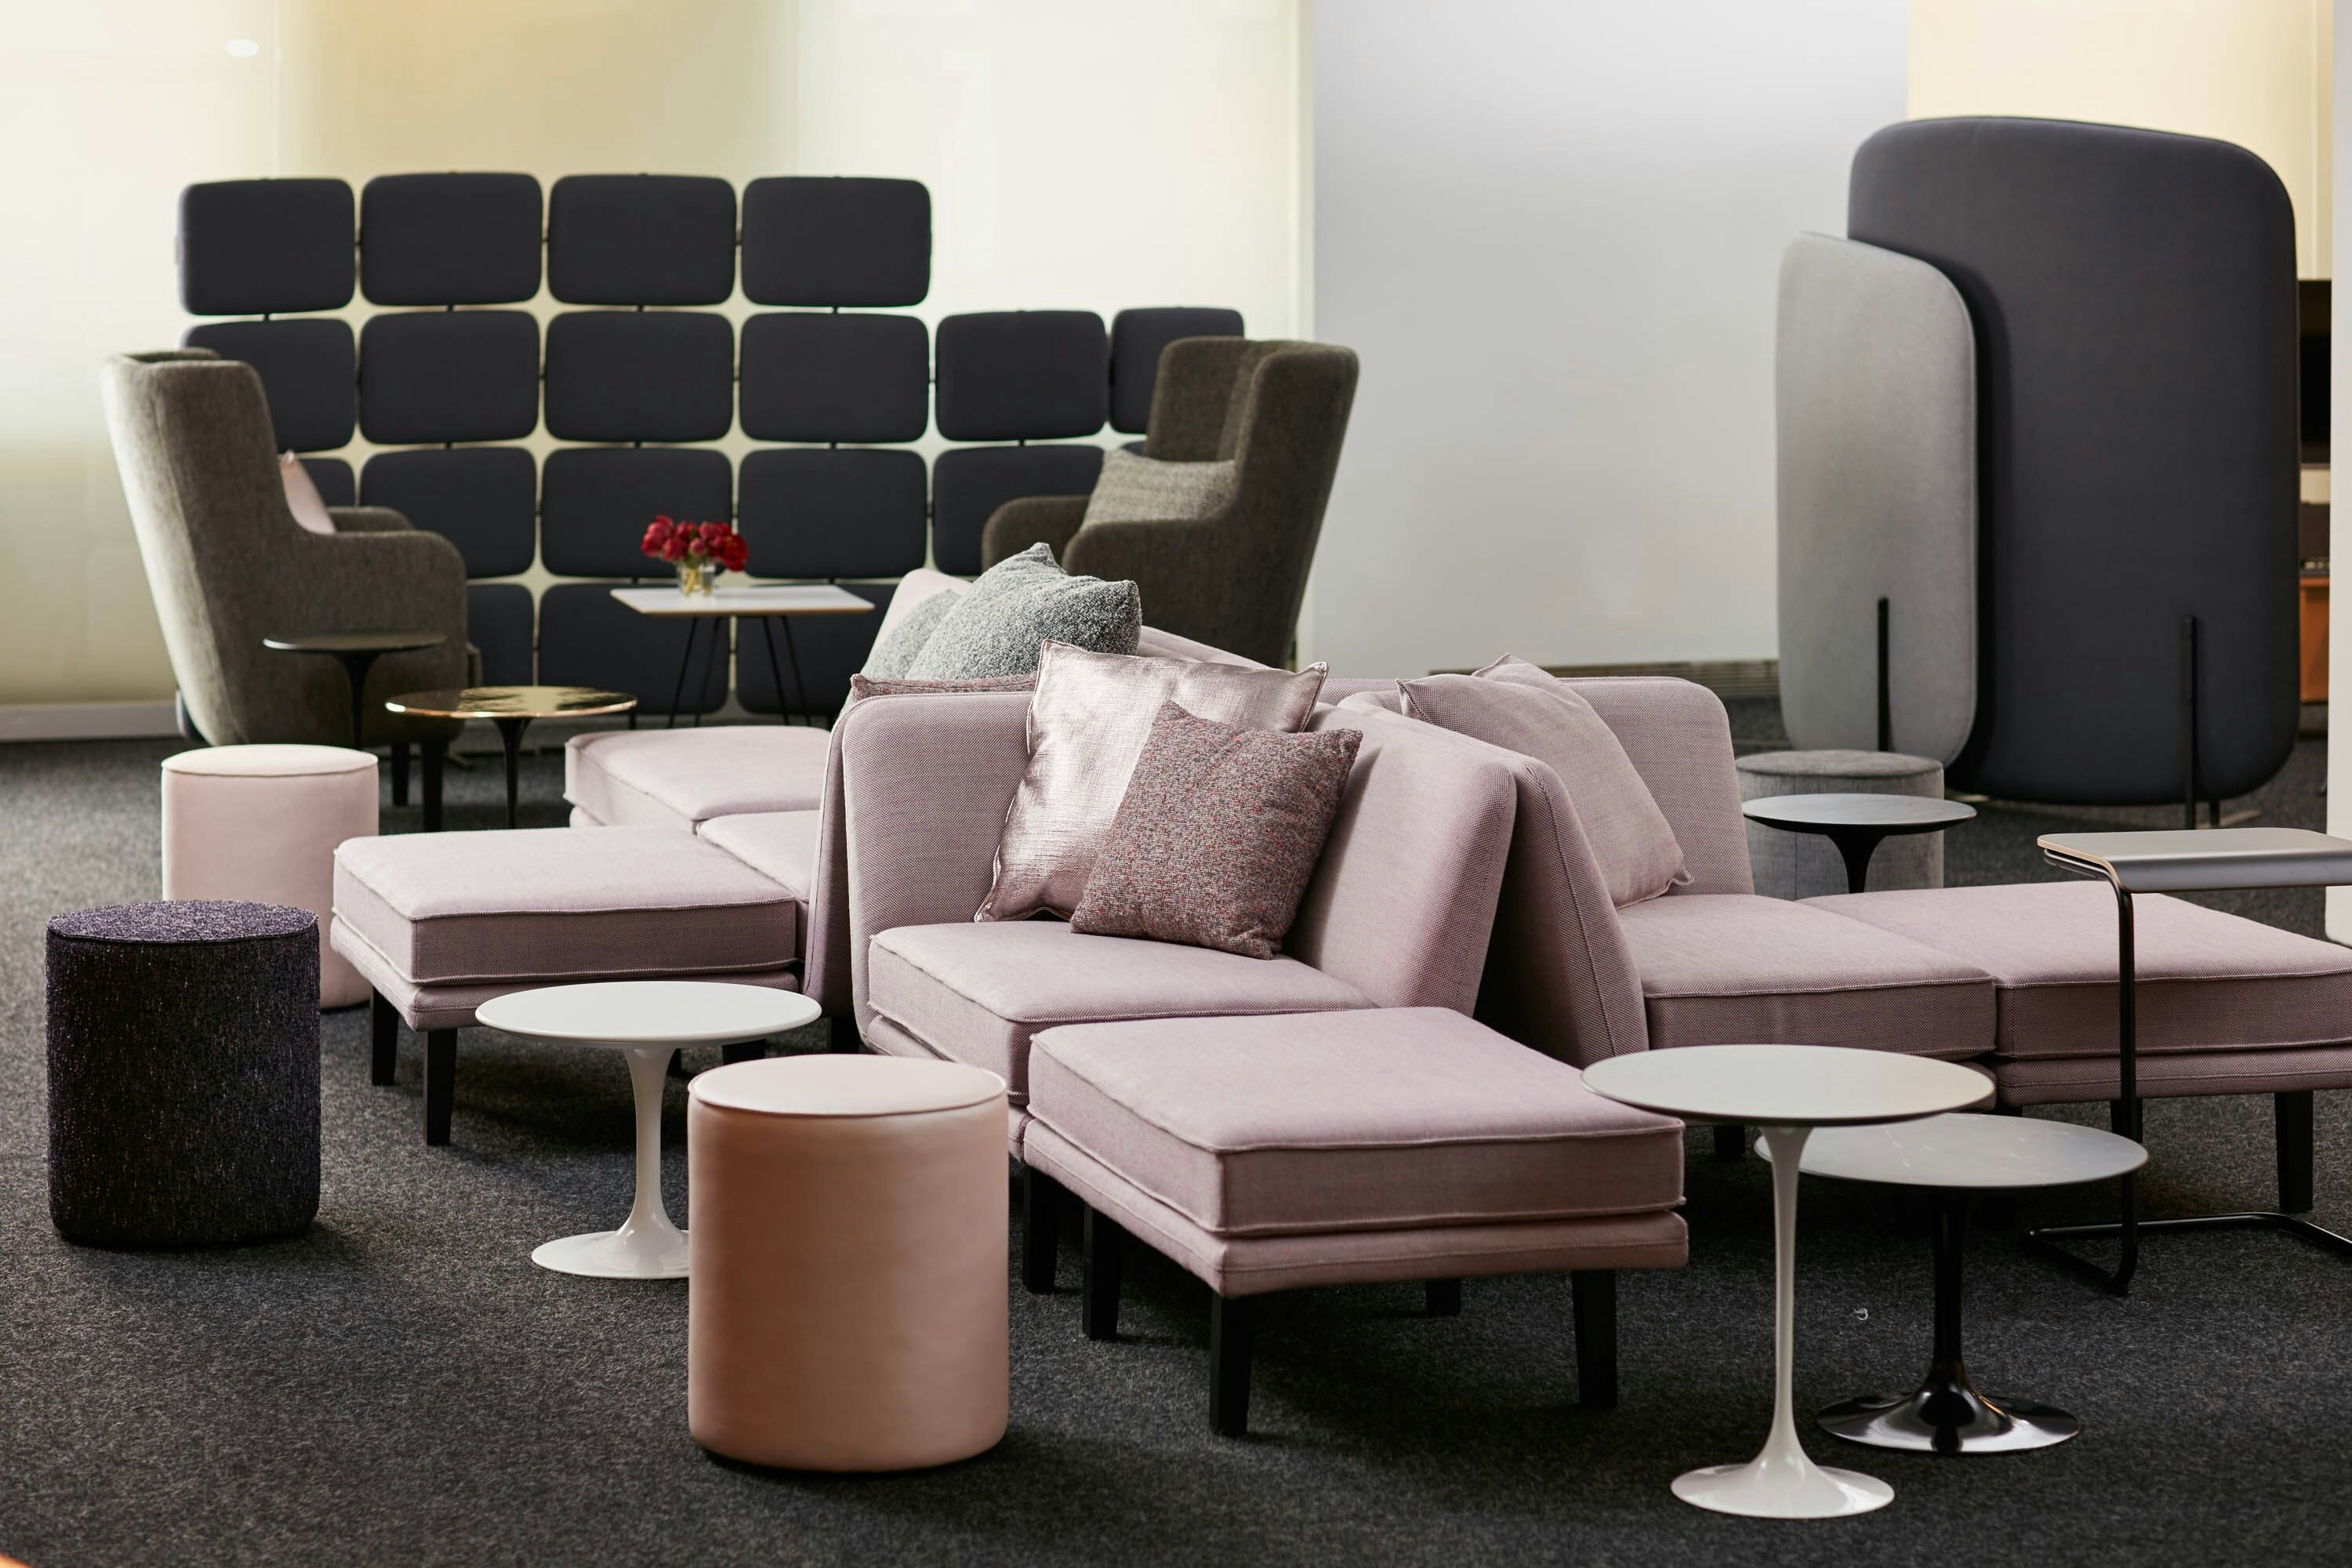 Rockwell Unscripted Modular Lounge | Knoll